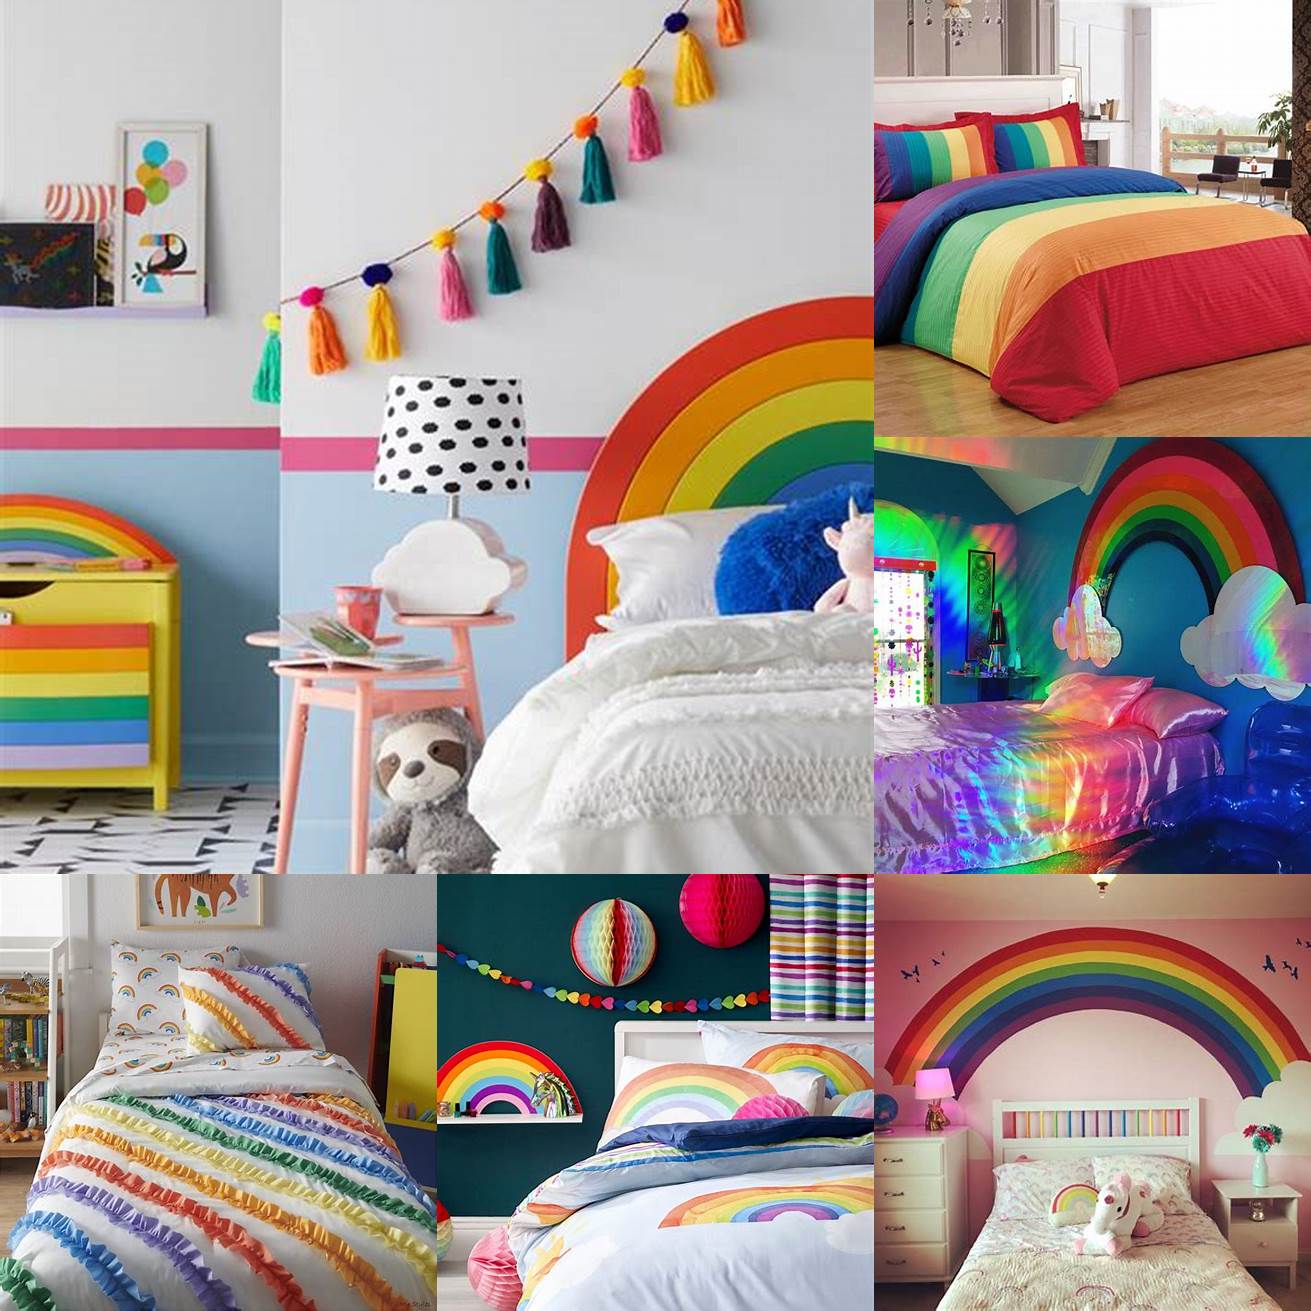 The Rainbow Bedroom Set is perfect for those who want to add some personality to their bedroom